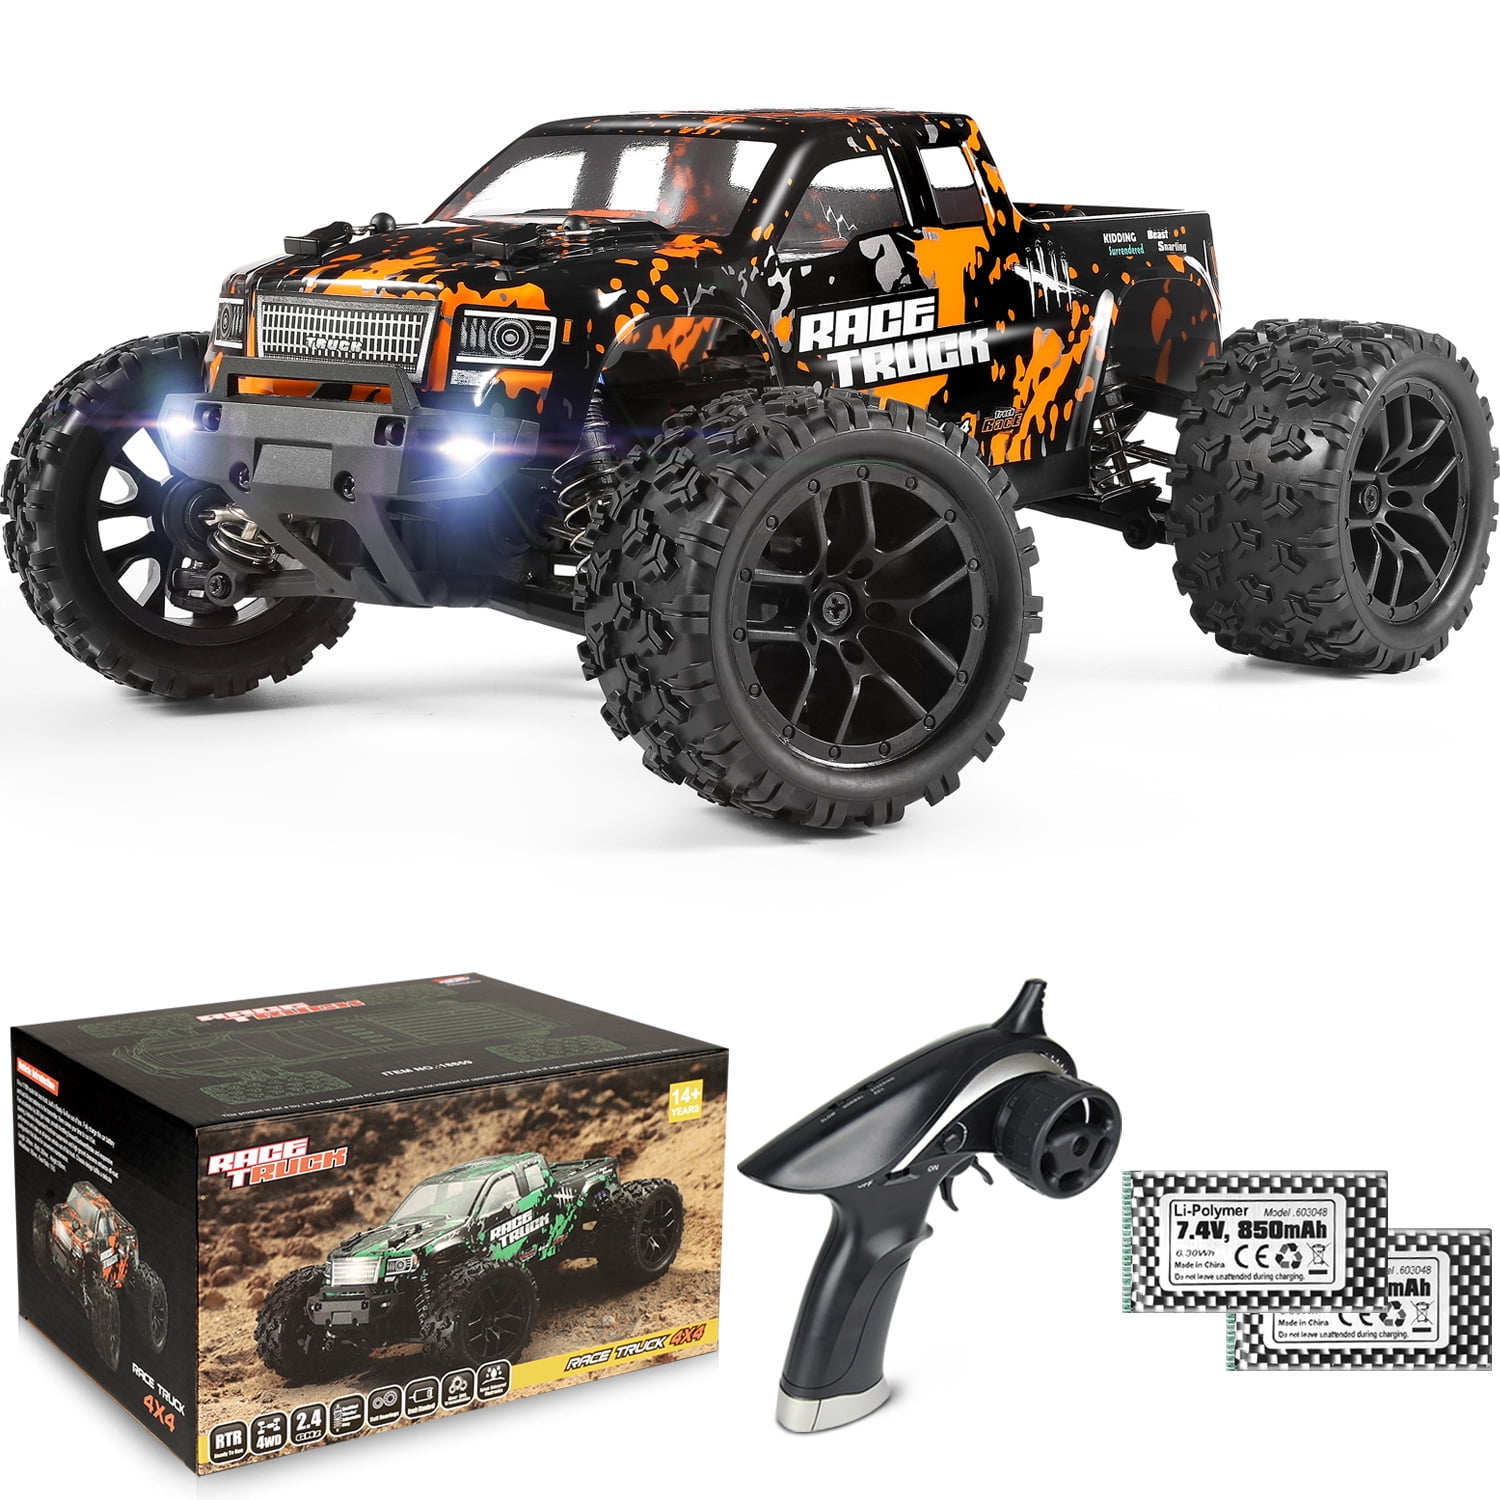 HAIBOXING 1:18 Scale RC Monster Truck 18859E 36km/h Speed